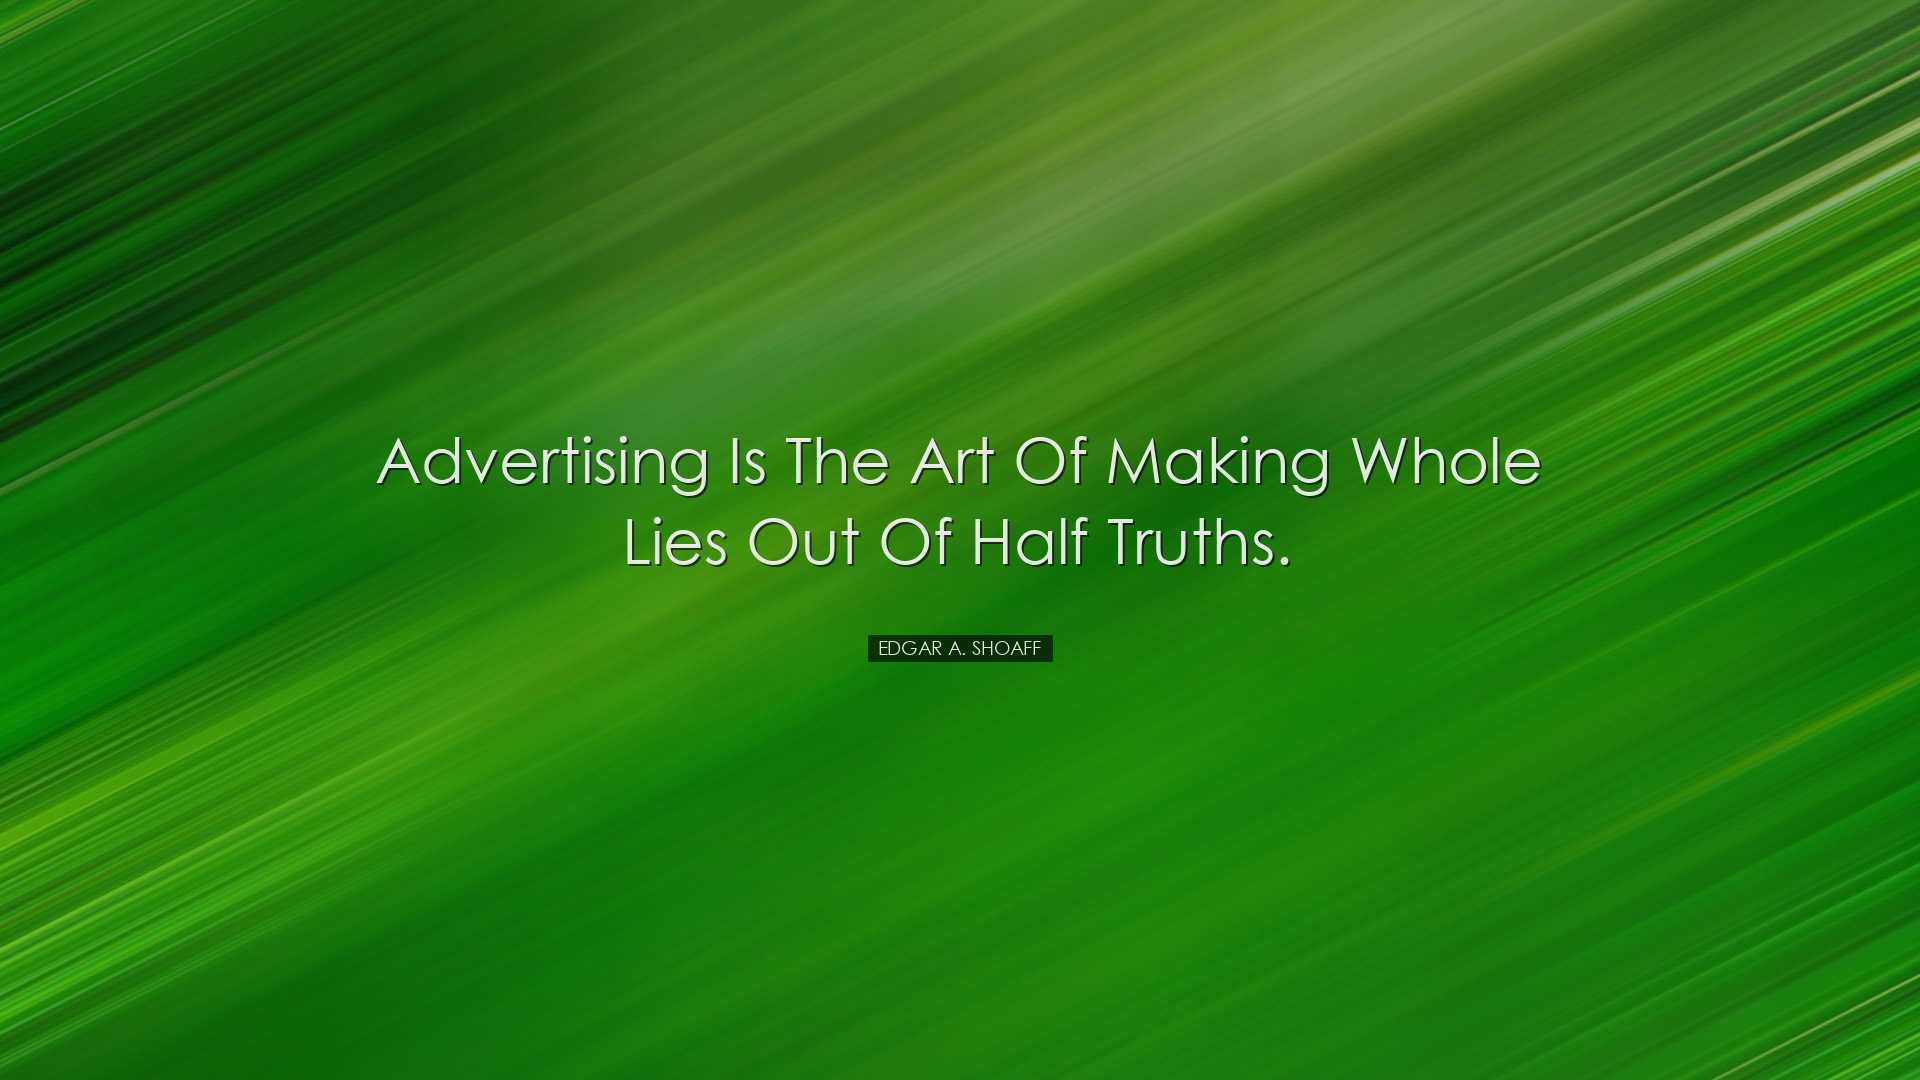 Advertising is the art of making whole lies out of half truths. -